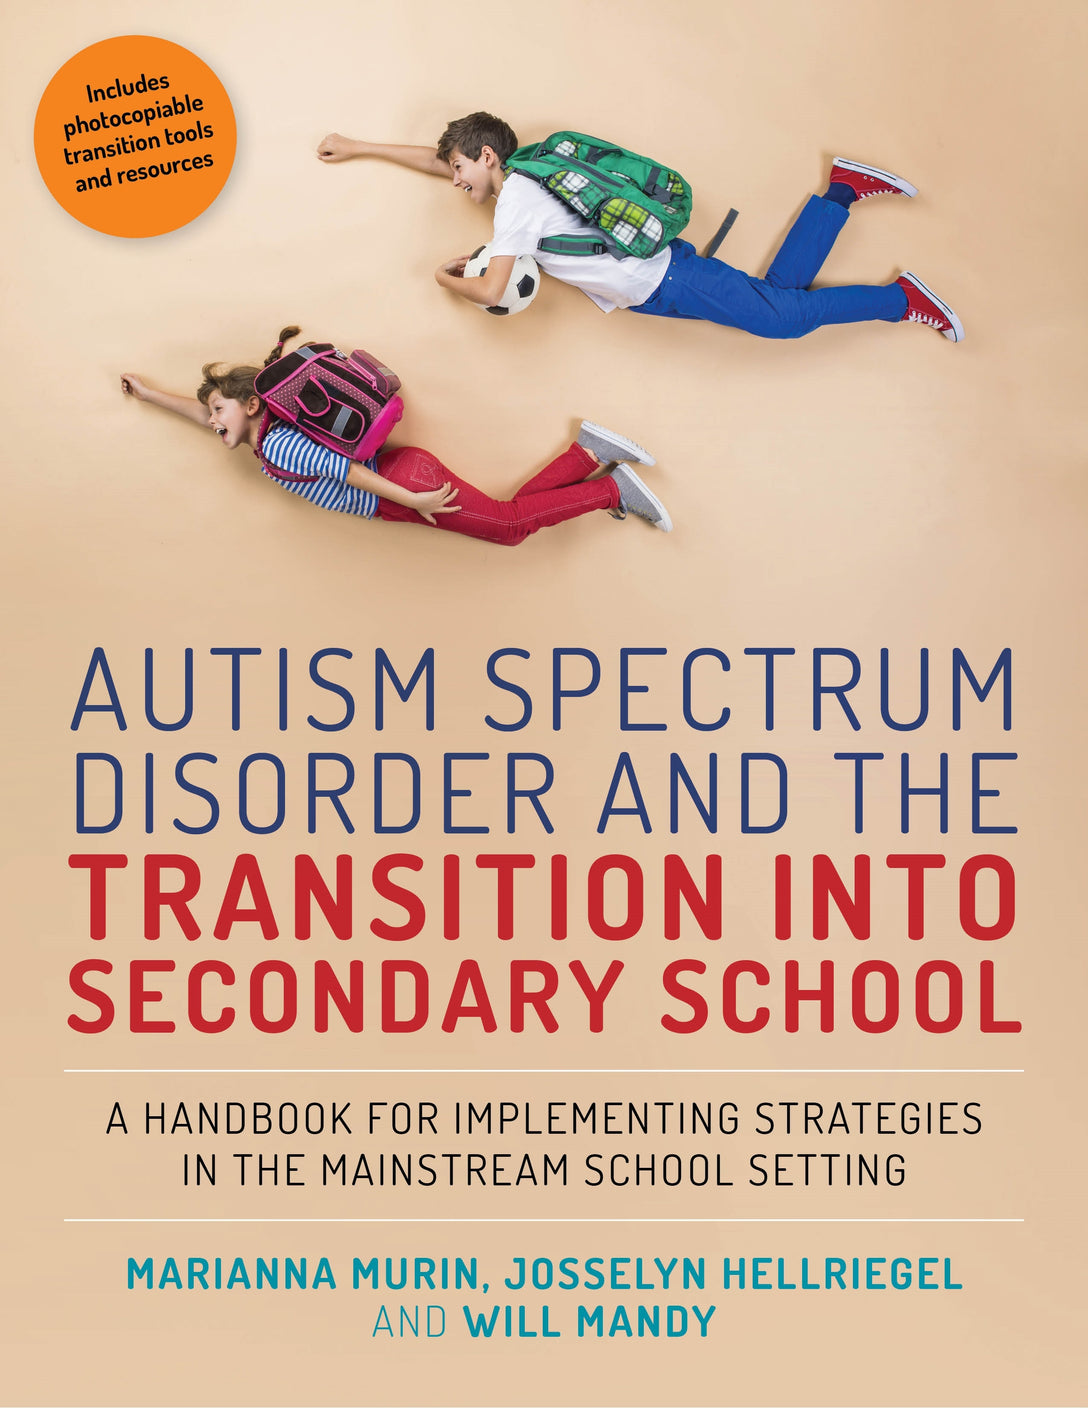 Autism Spectrum Disorder and the Transition into Secondary School by Marianna Murin, Josselyn Hellriegel, Will Mandy